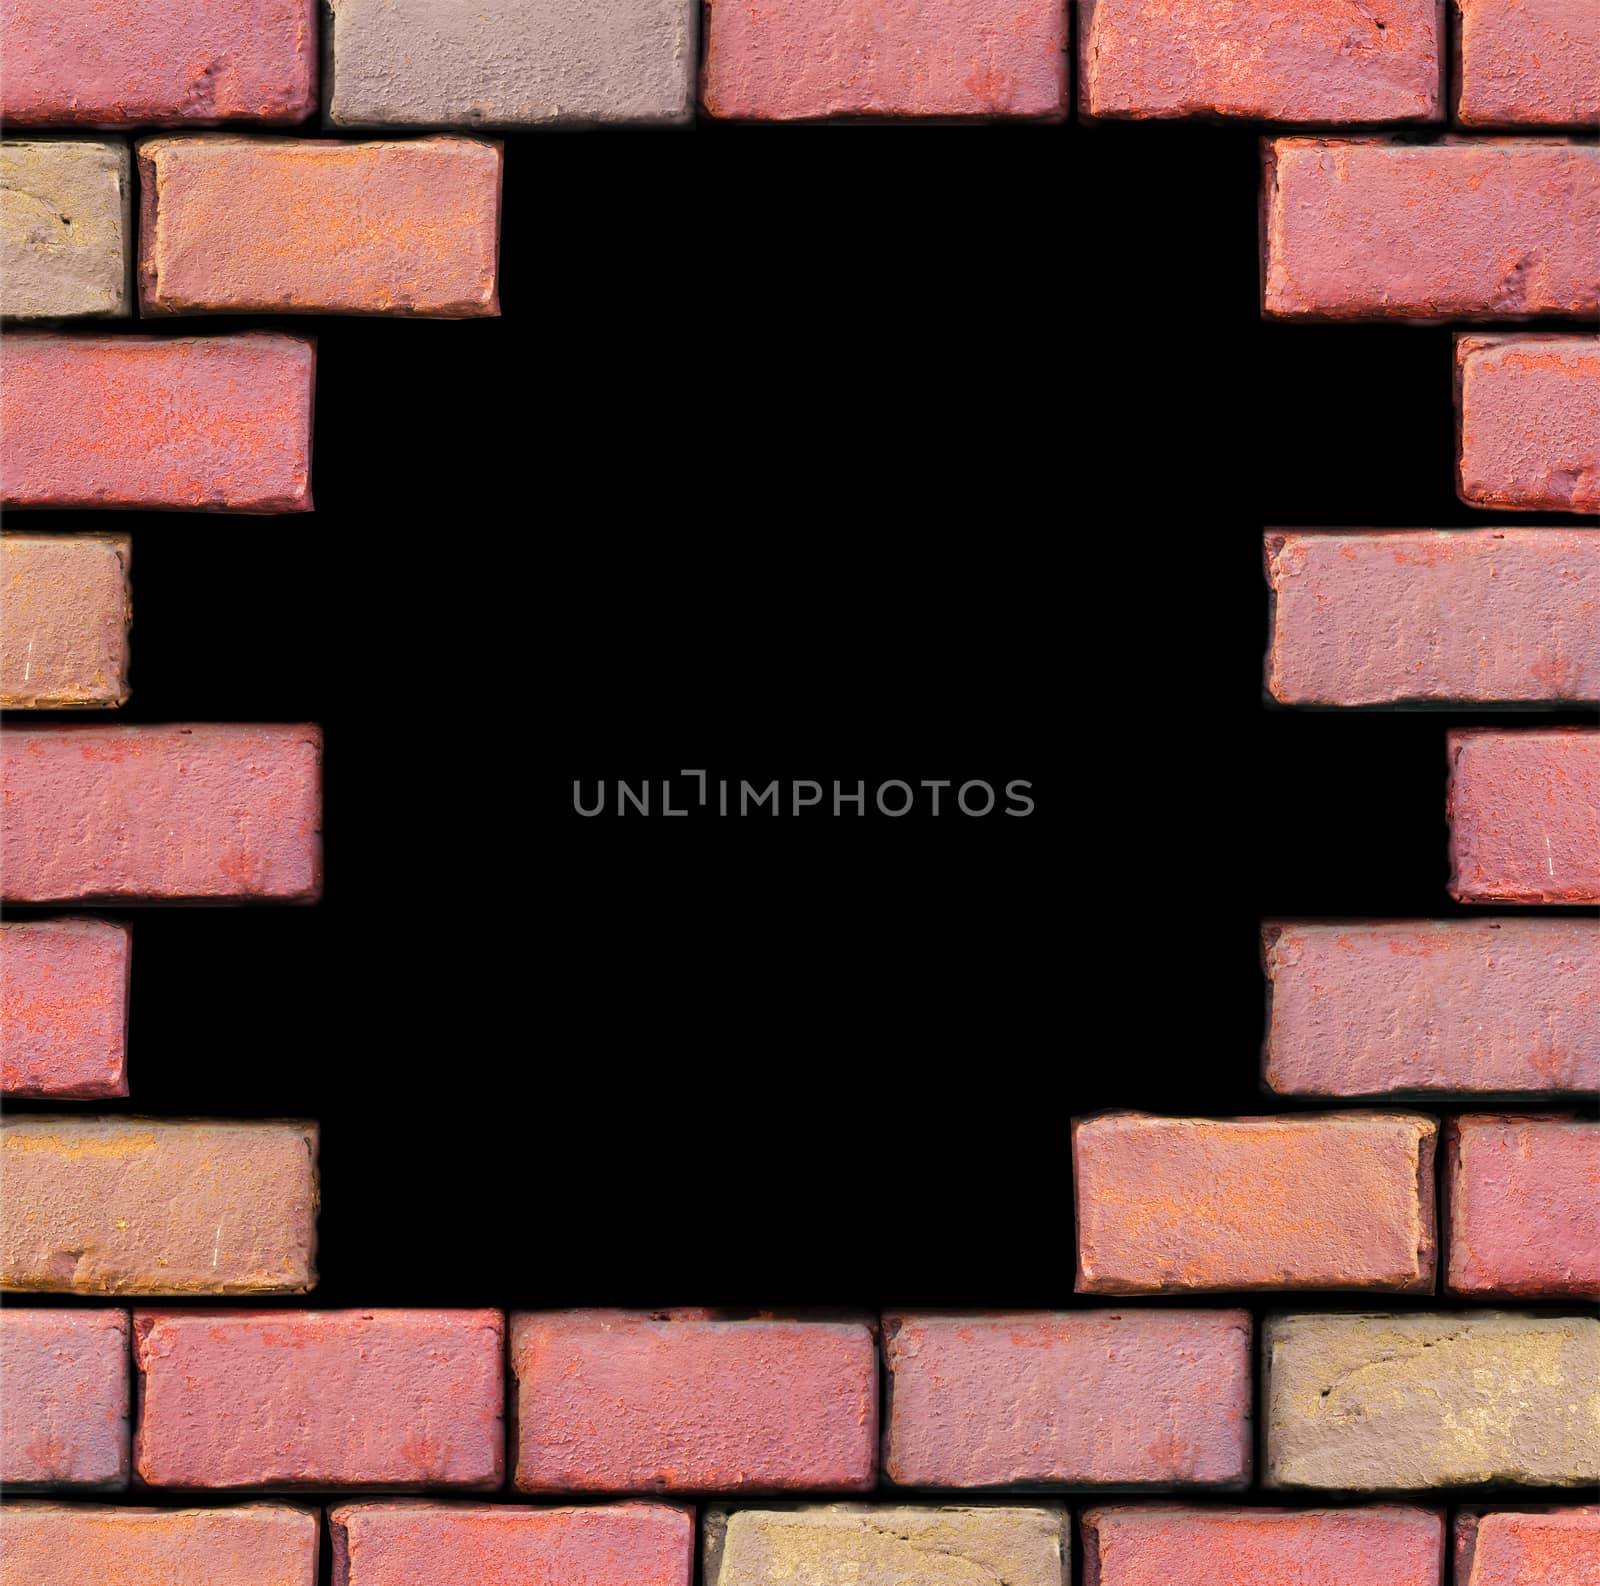 frame from old red bricks with black background